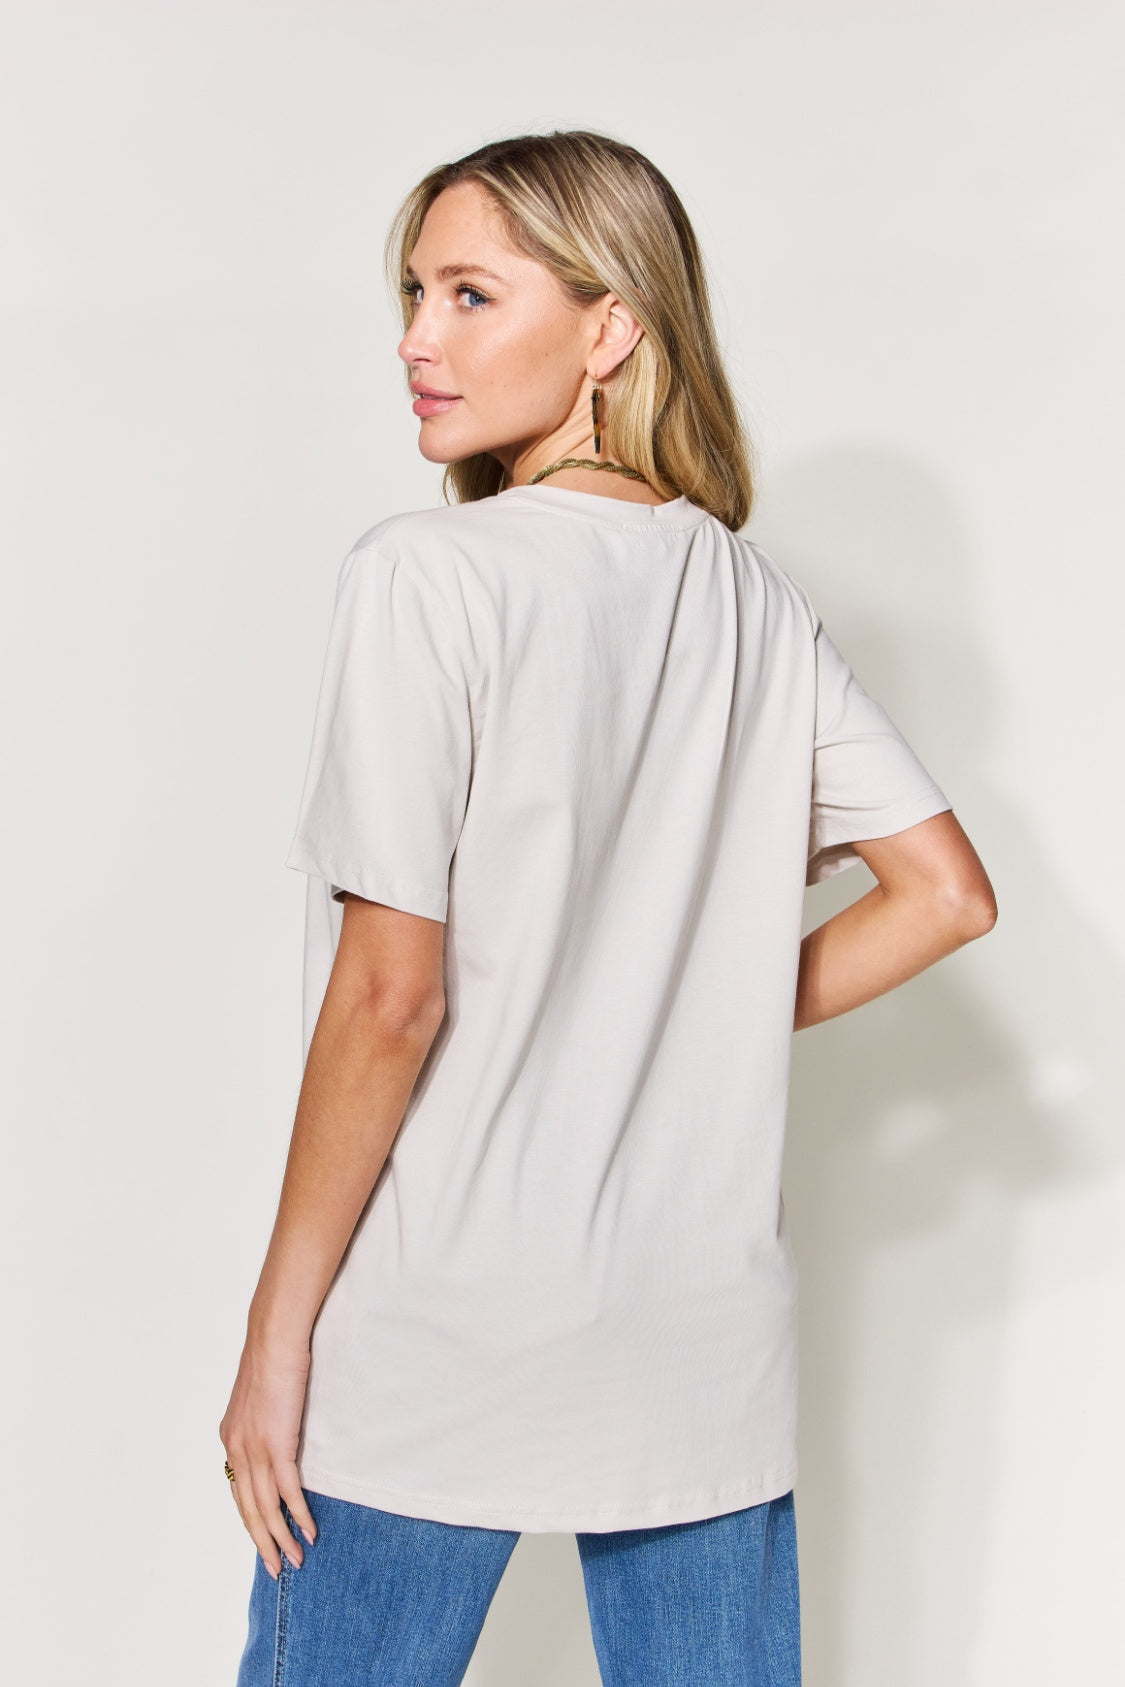 Simply Love Full Size MAMA Round Neck Short Sleeve T-Shirt  | KIKI COUTURE